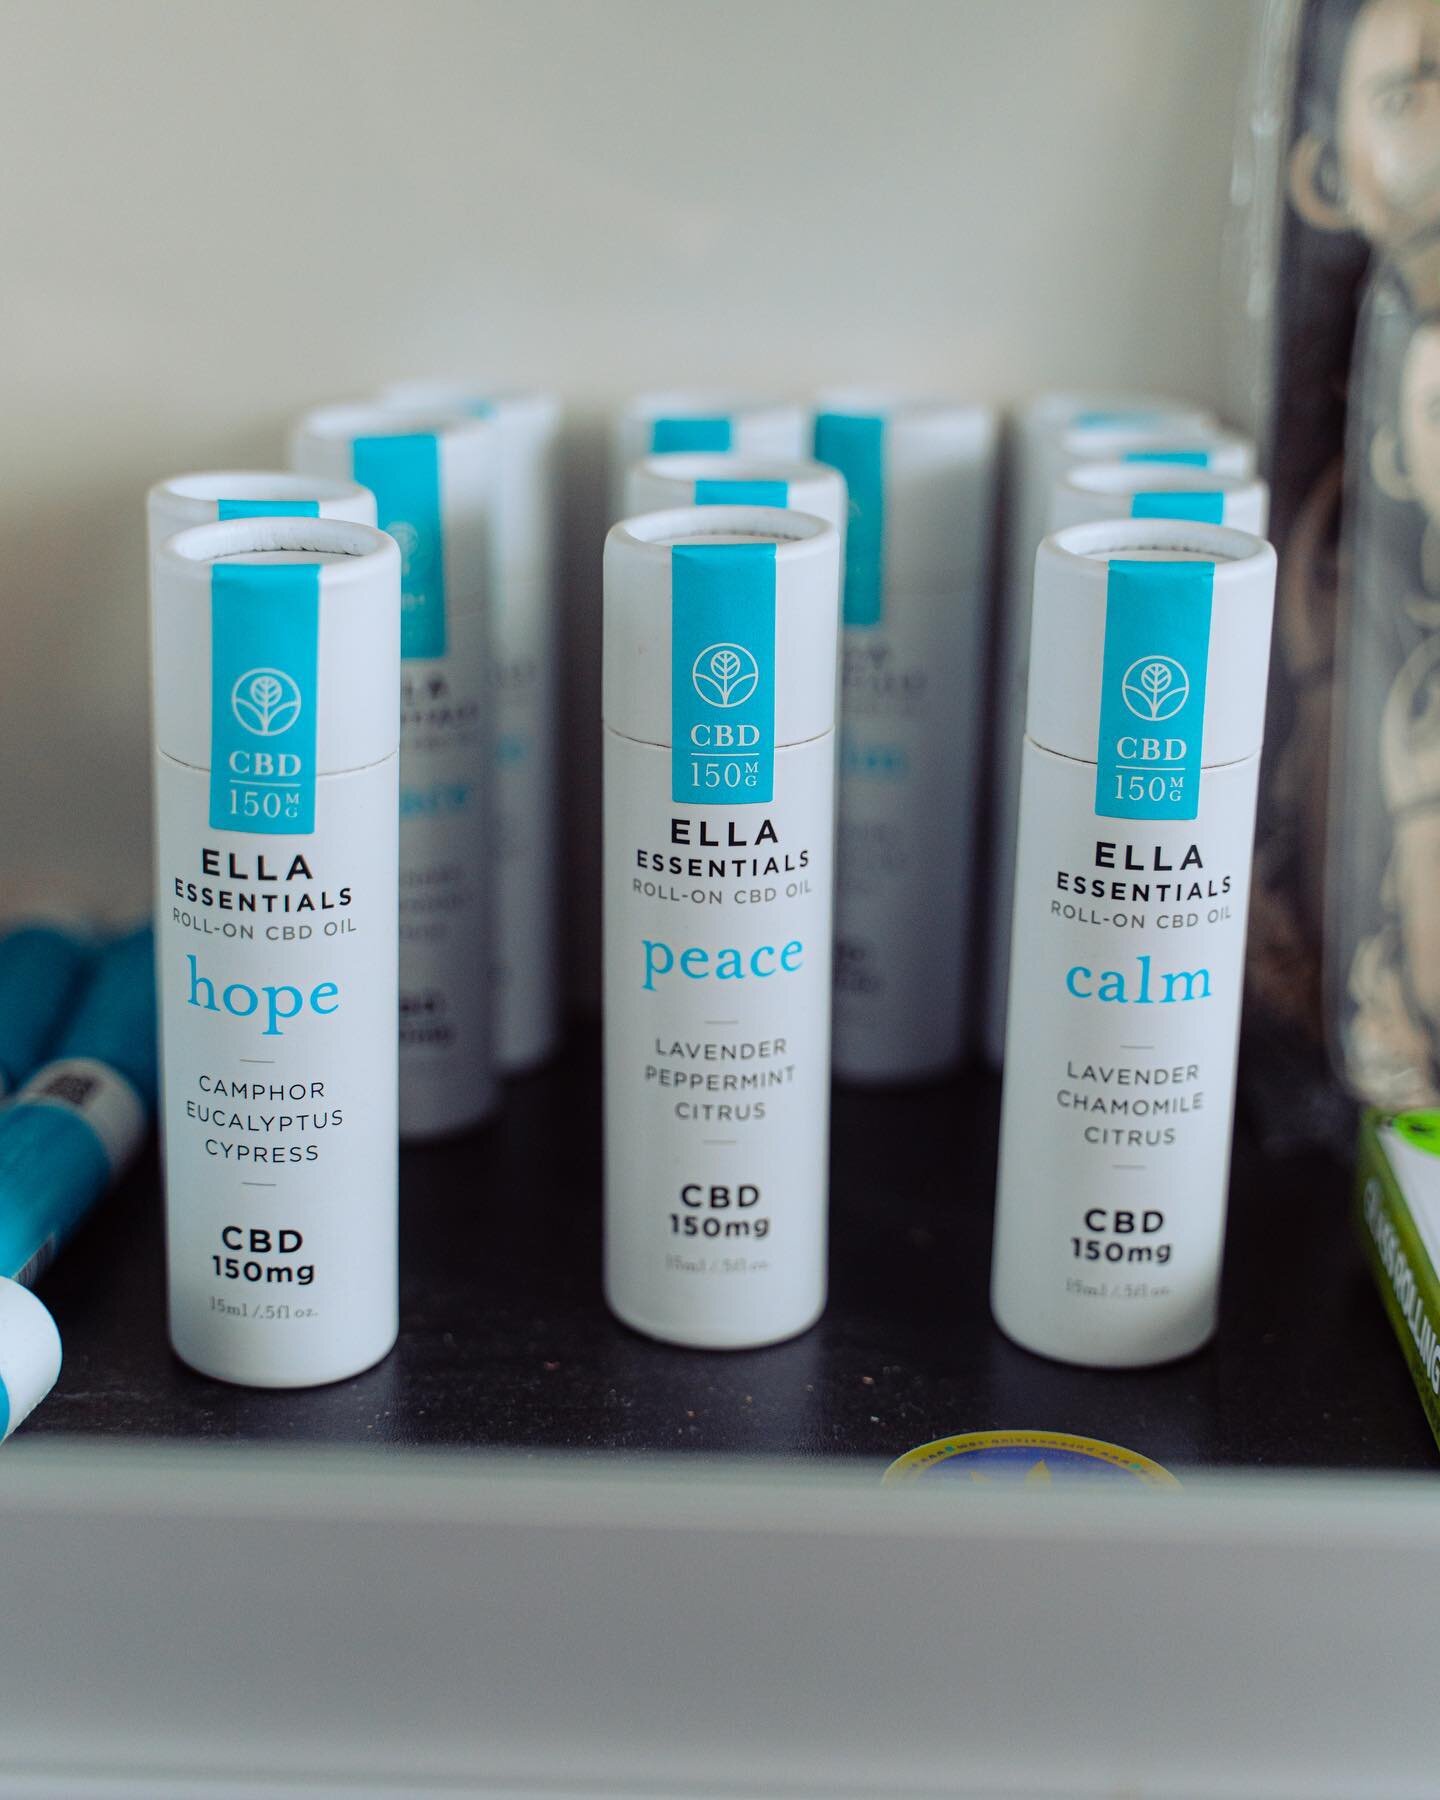 We&rsquo;ve got topicals for days! Whether you need to relax, relieve, or energize yourself - let the power of CBD and @ella.essentials assist you. 😌 

Applying CBD directly to this skin is also known for relieving pain, reducing inflammation &amp; 